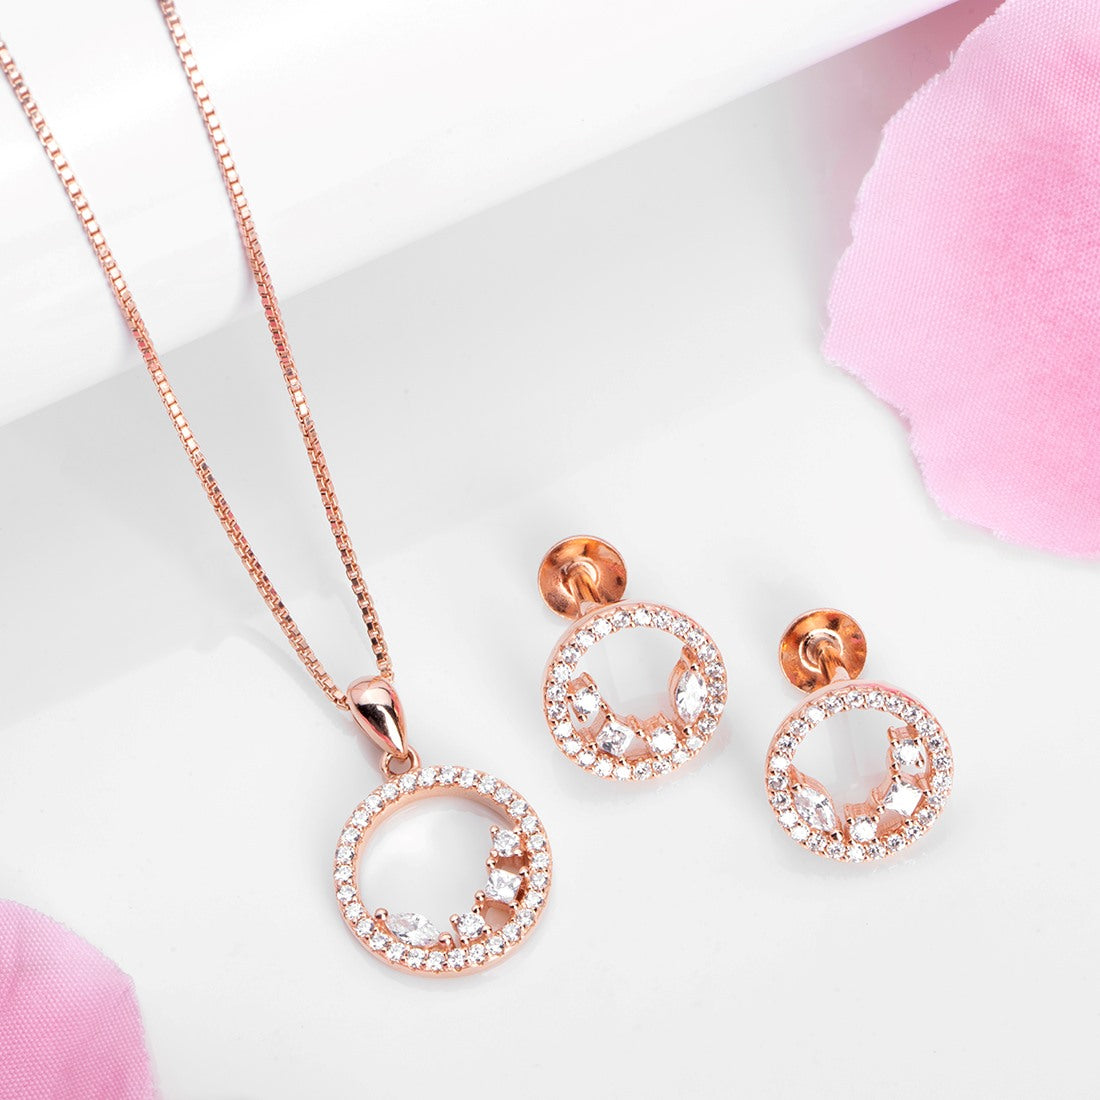 Celestial Circle of Elegance Rose Gold-Plated CZ 925 Sterling Silver Jewelry Set